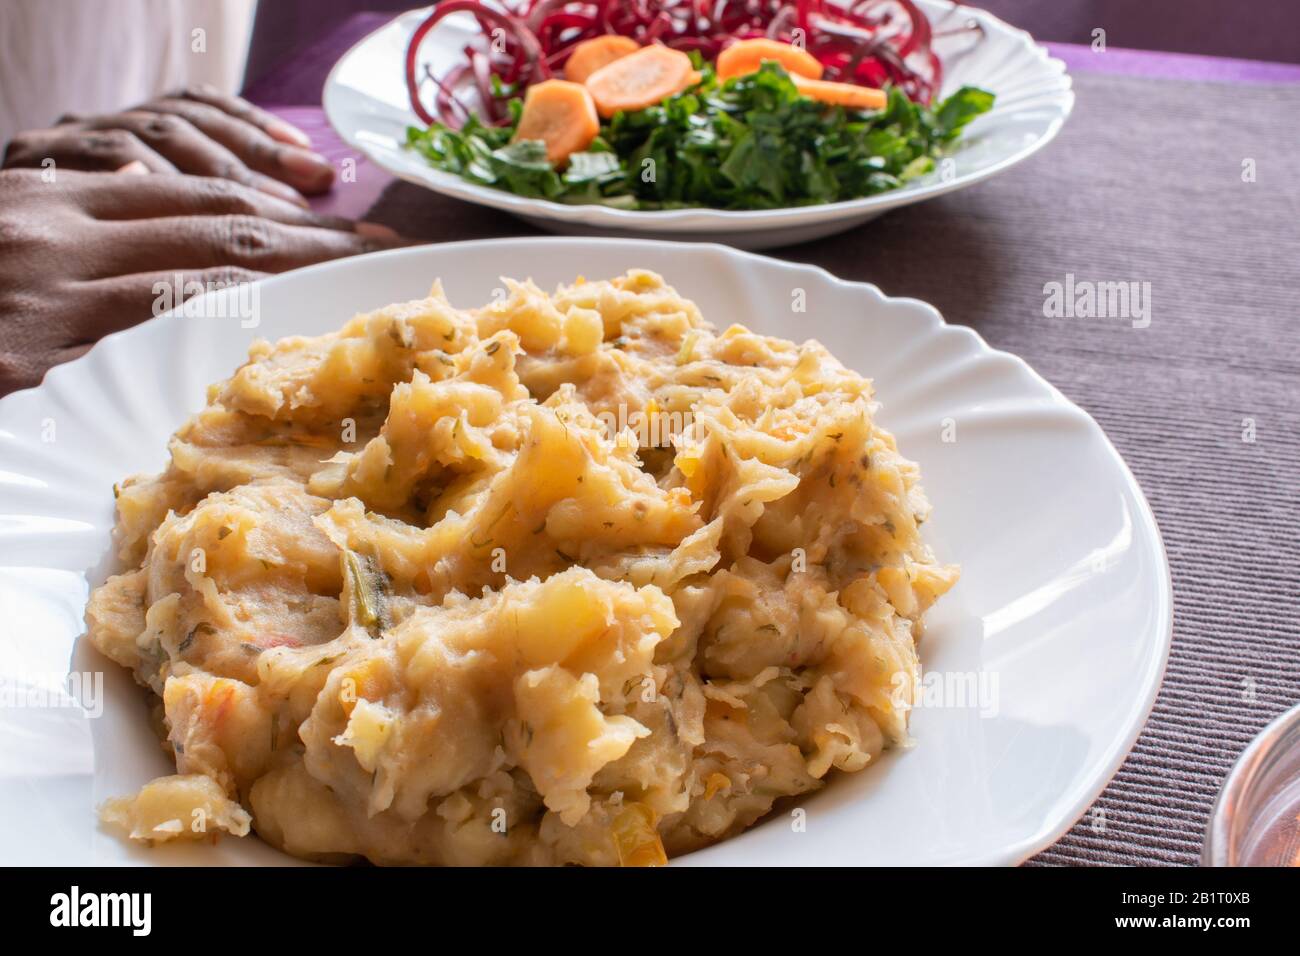 a plate of matoke next to vegetable . matoke is traditional food made using unripe banana. Stock Photo